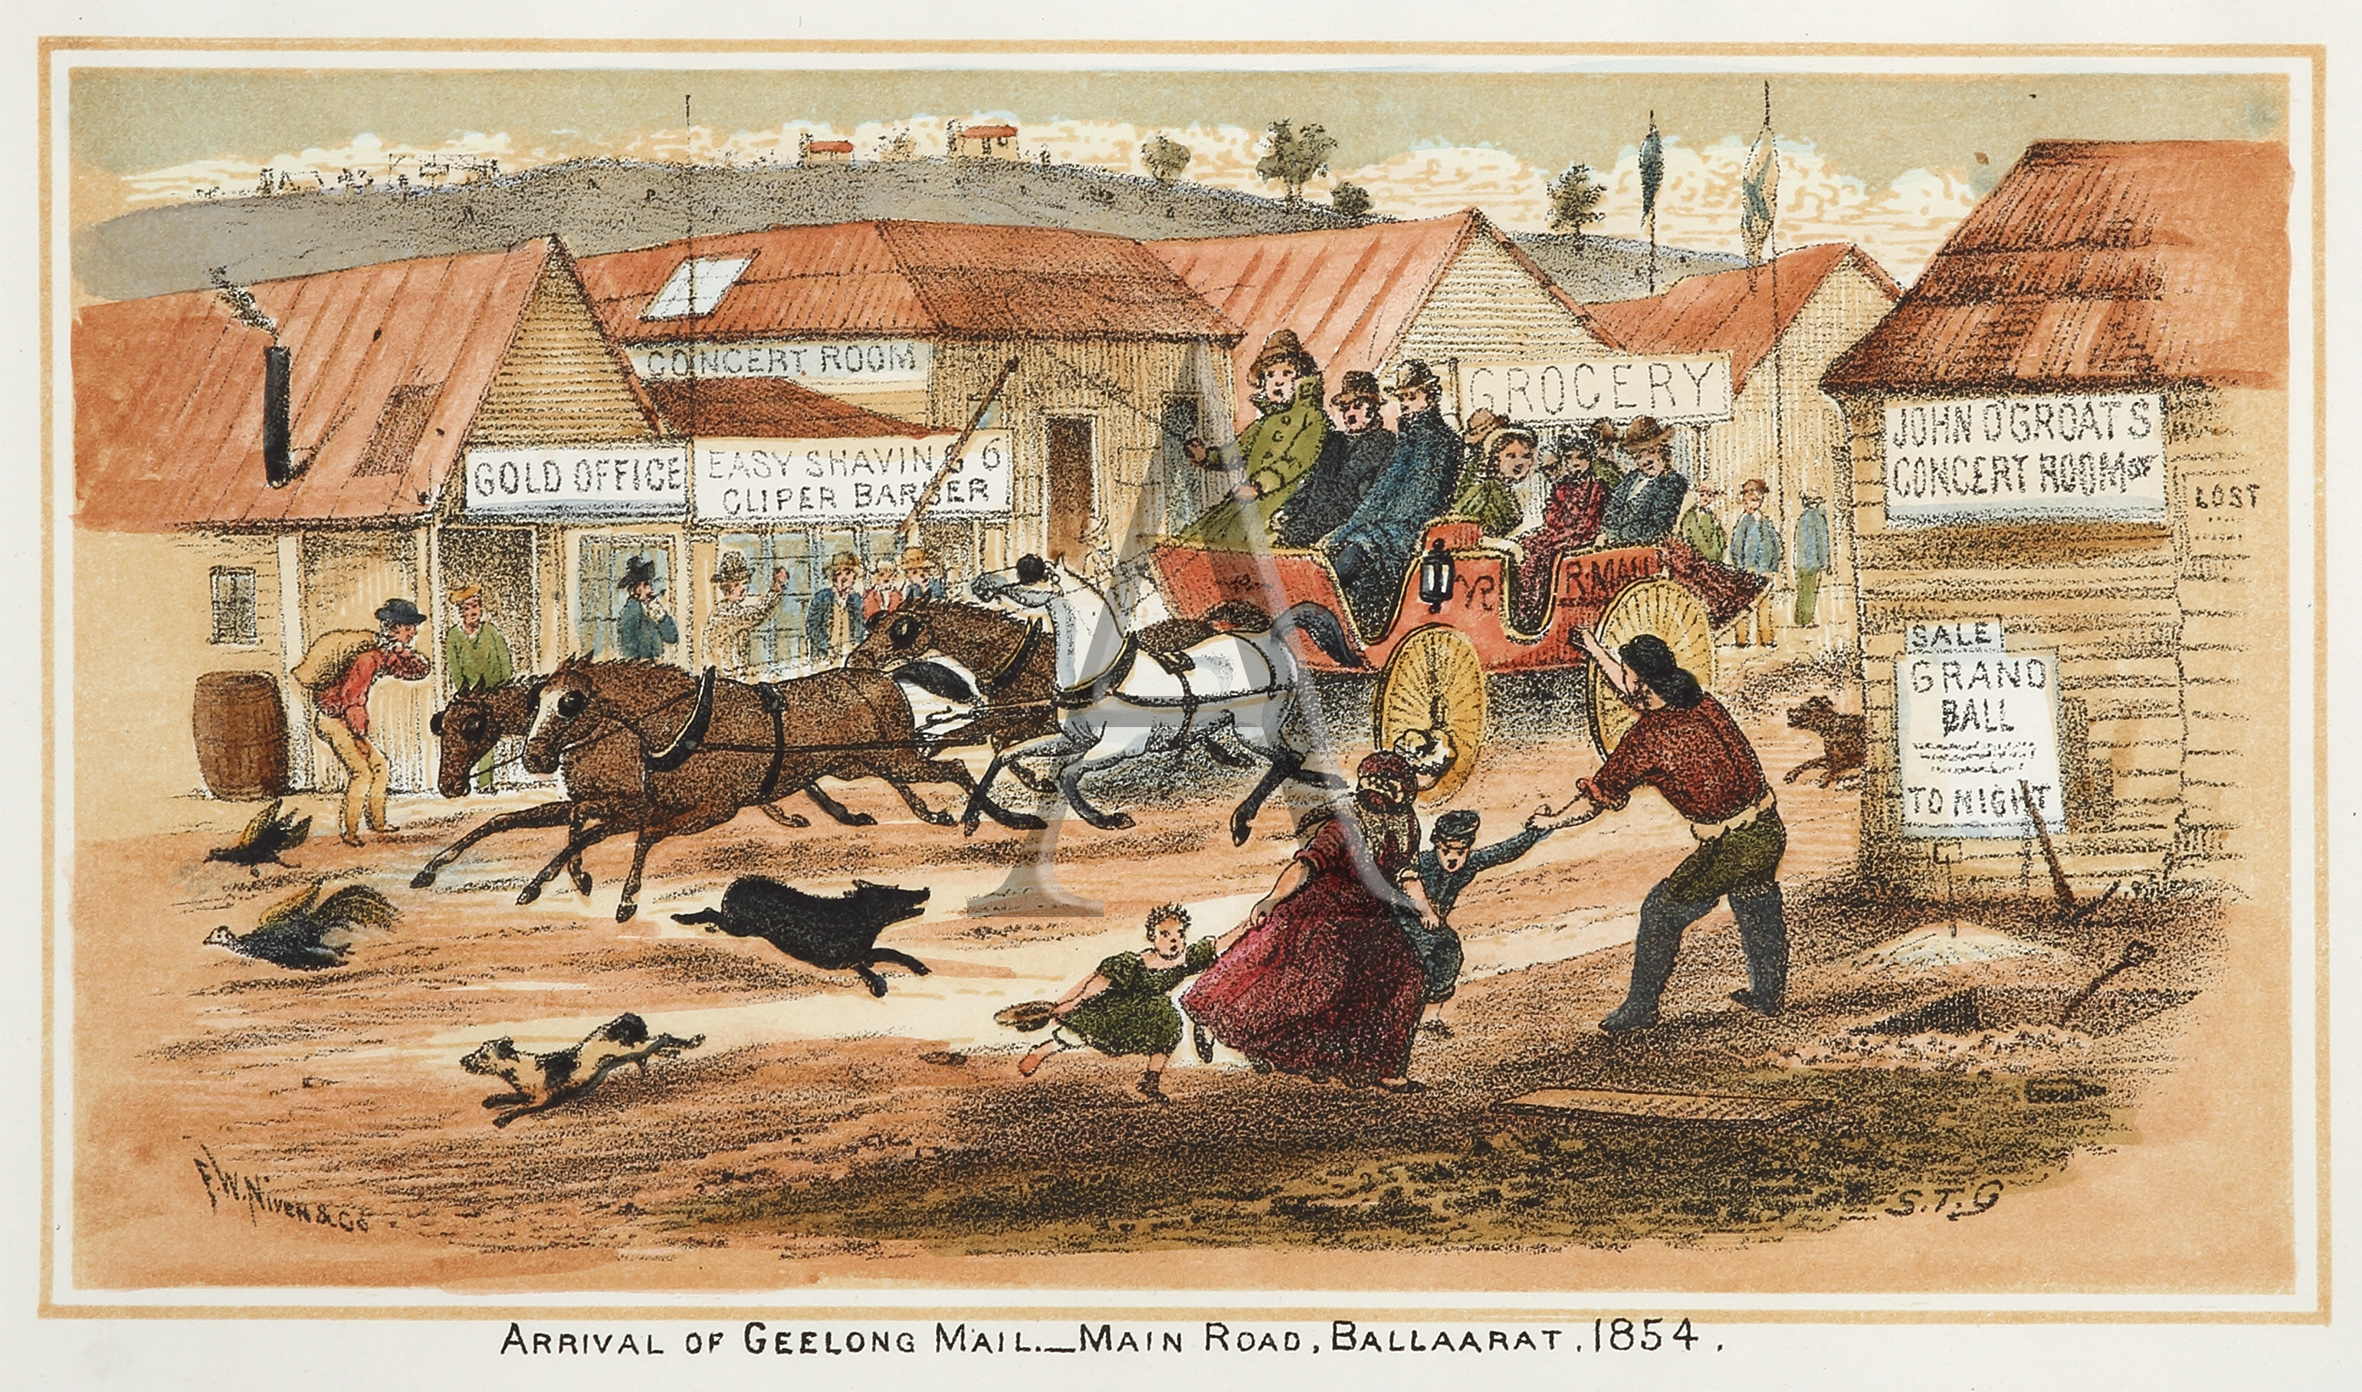 Arrival of Geelong Mail - Main Road, Ballarat, 1854. - Antique View from 1887